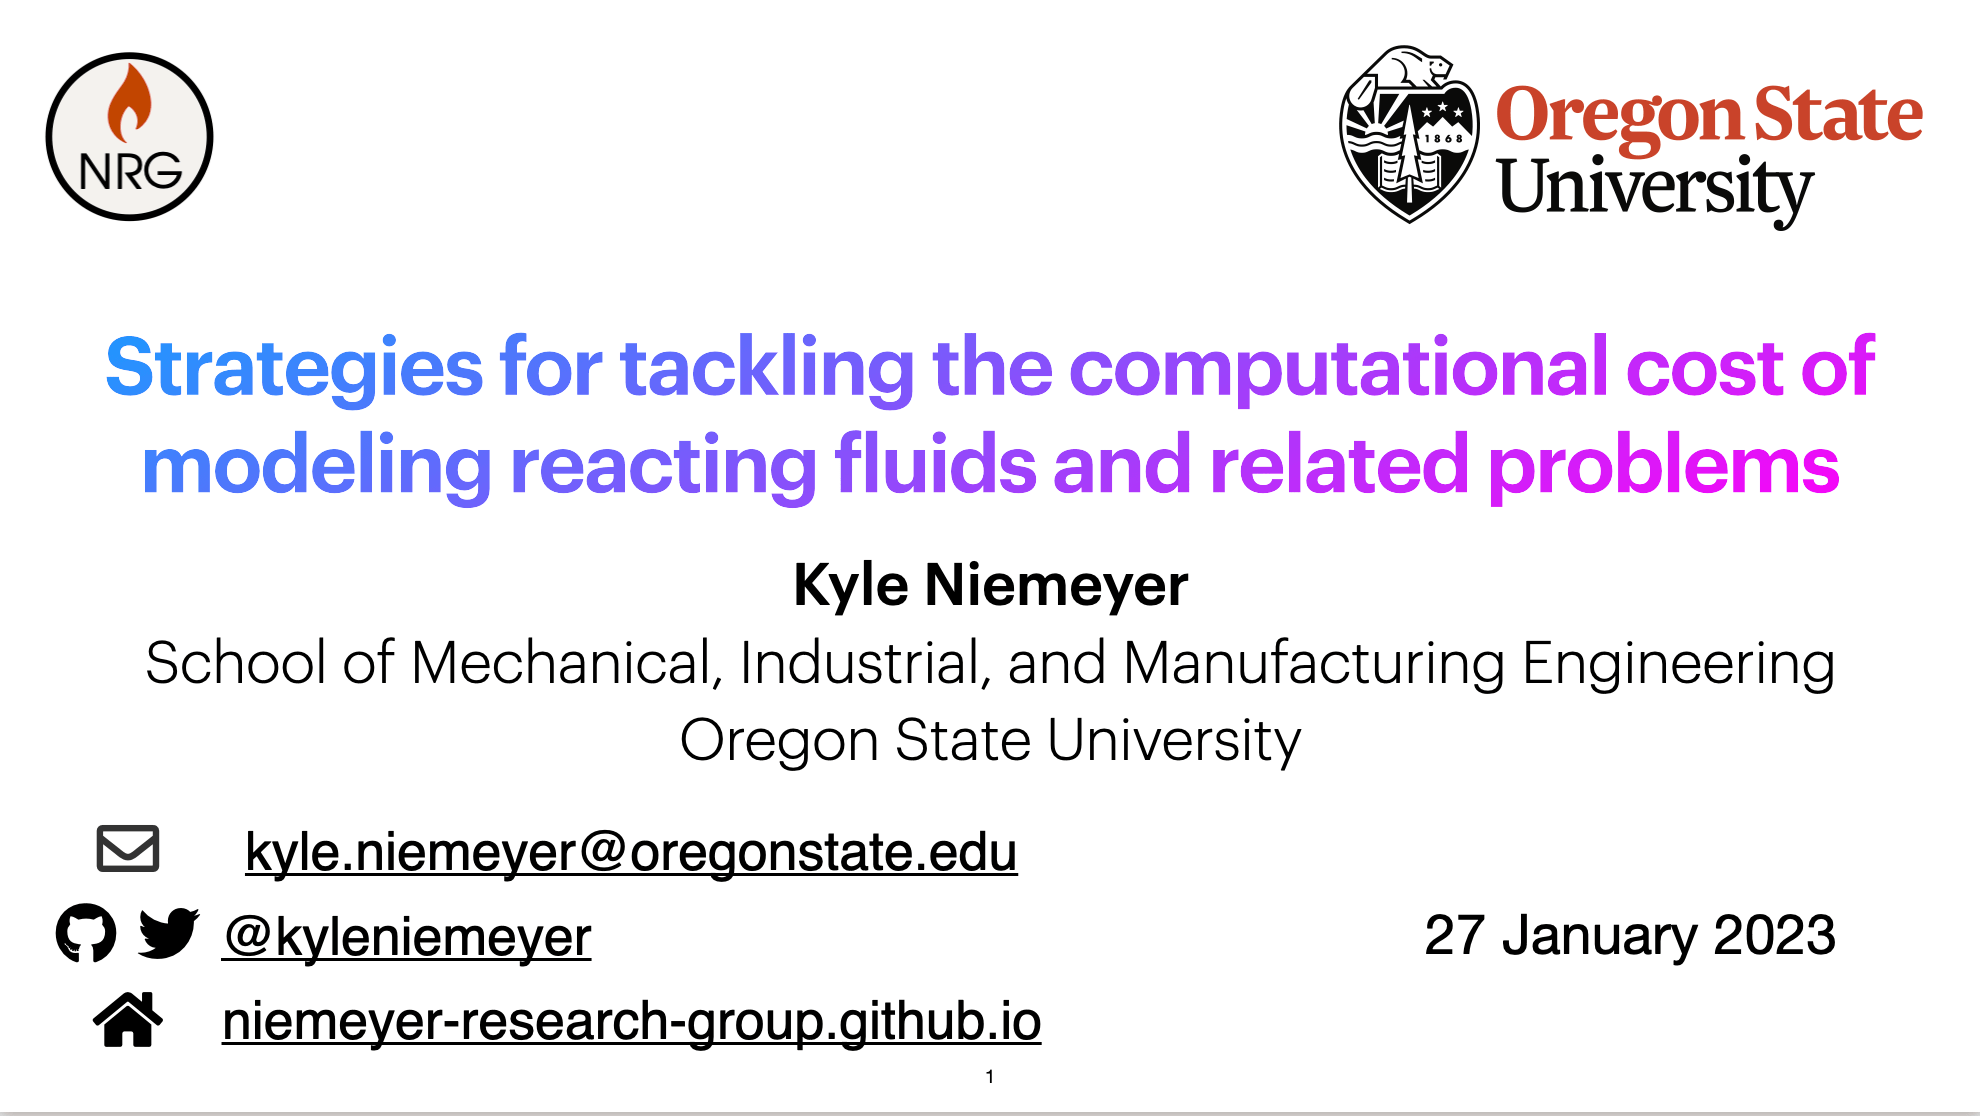 Title slide of the talk, which says 'Strategies for tackling the computational cost of modeling reacting fluids and related problems'.